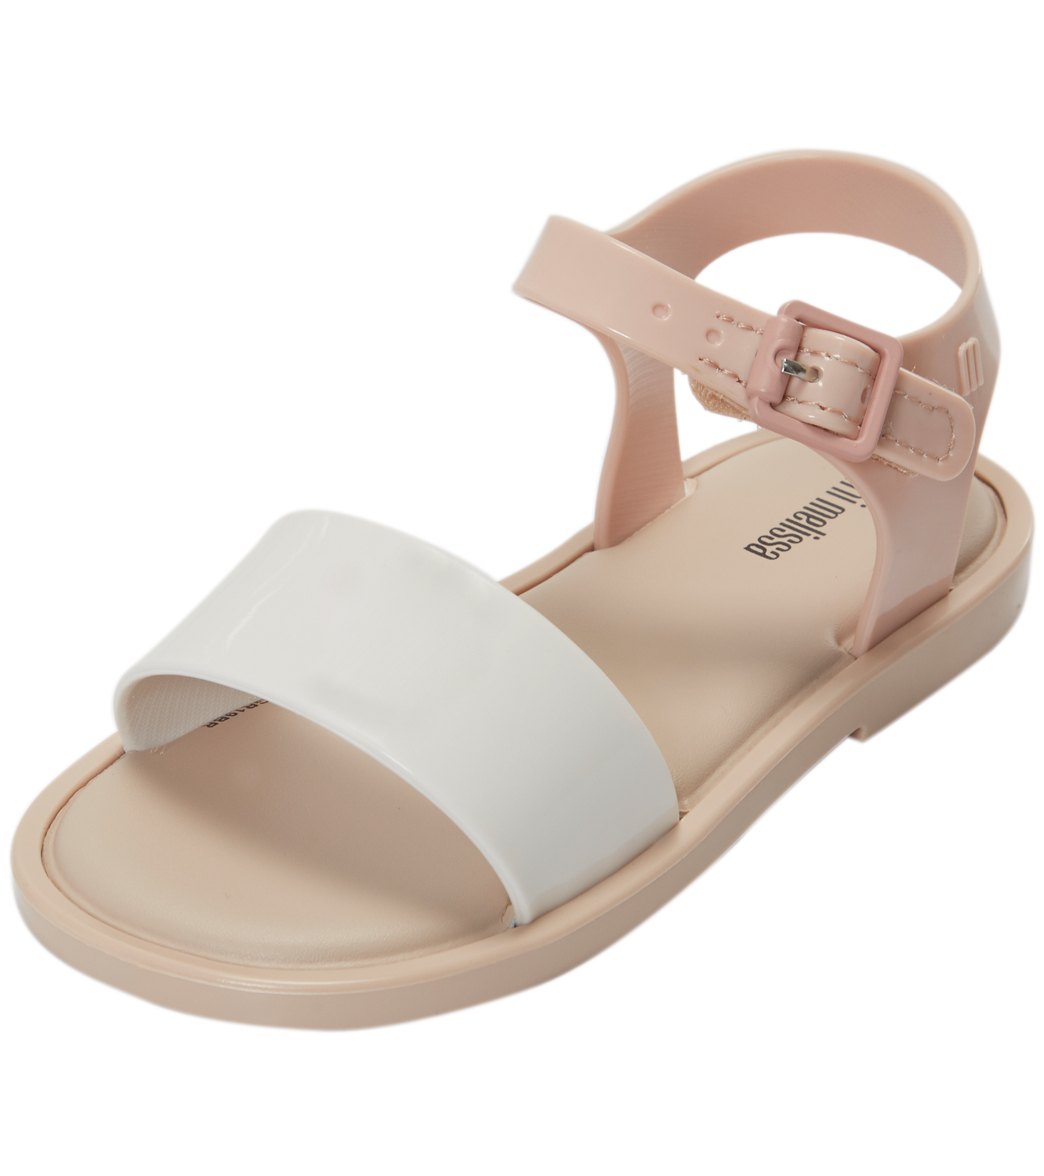 Mel By Melissa Mini Water Friendly Fashion Sandals - Nude Soft Pink 9 100% Rubber - Swimoutlet.com